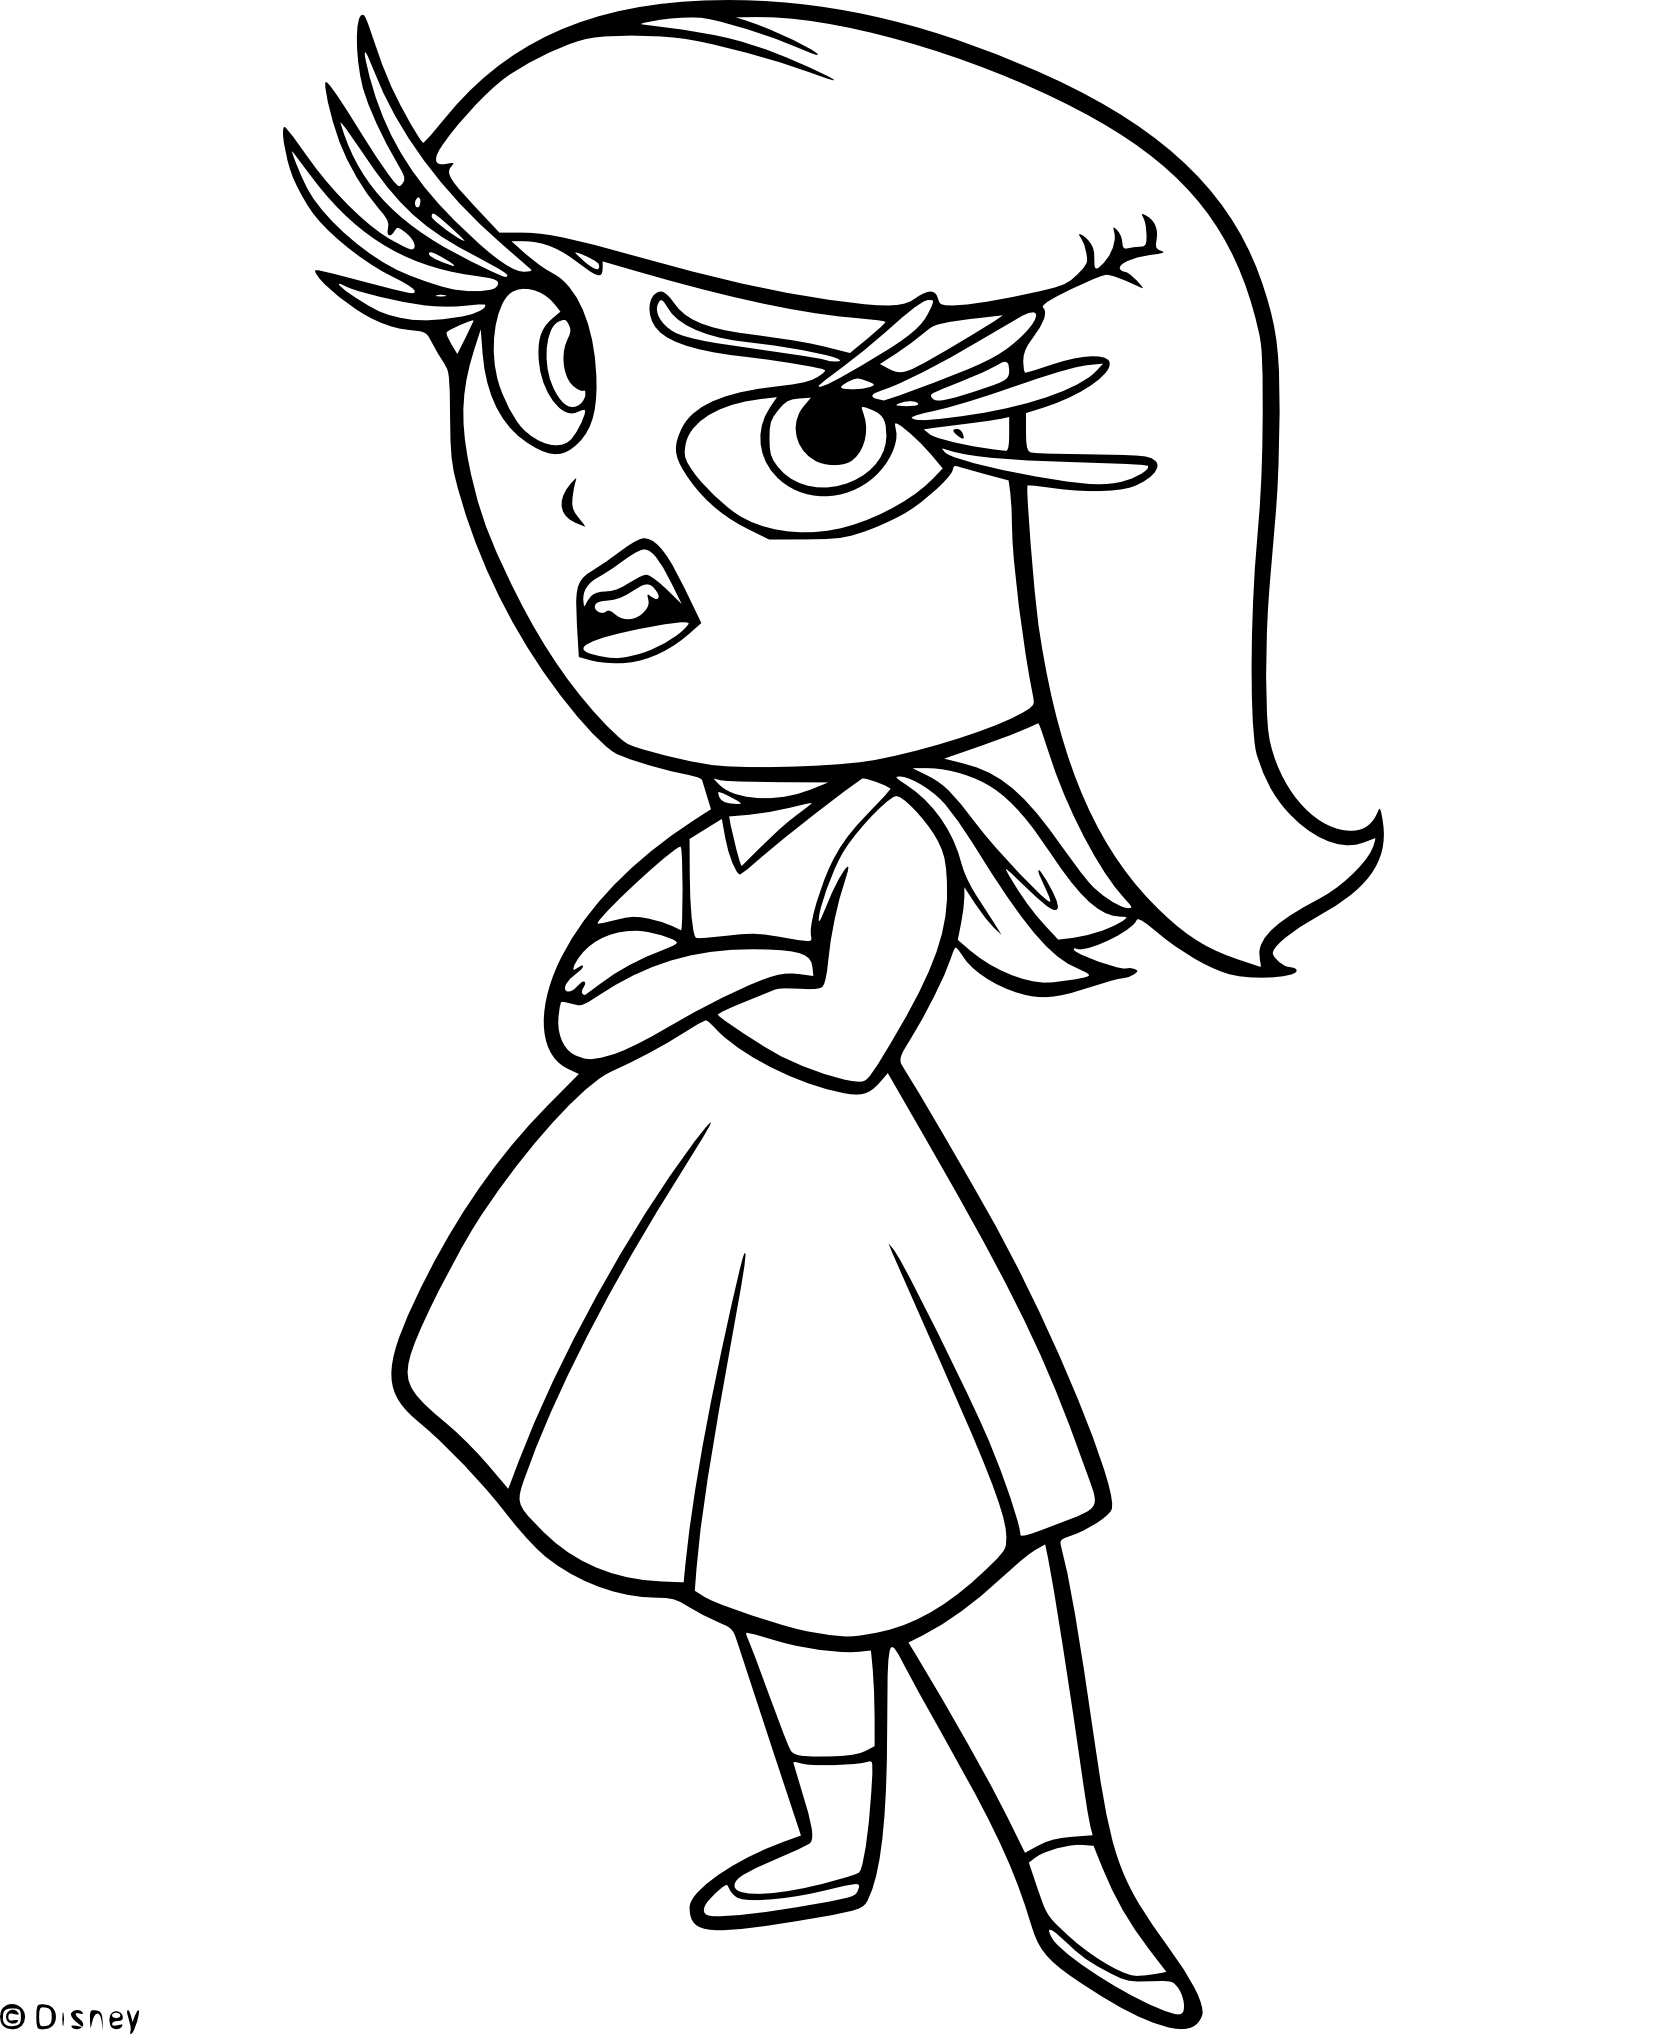 Vice Versa Disgust coloring page